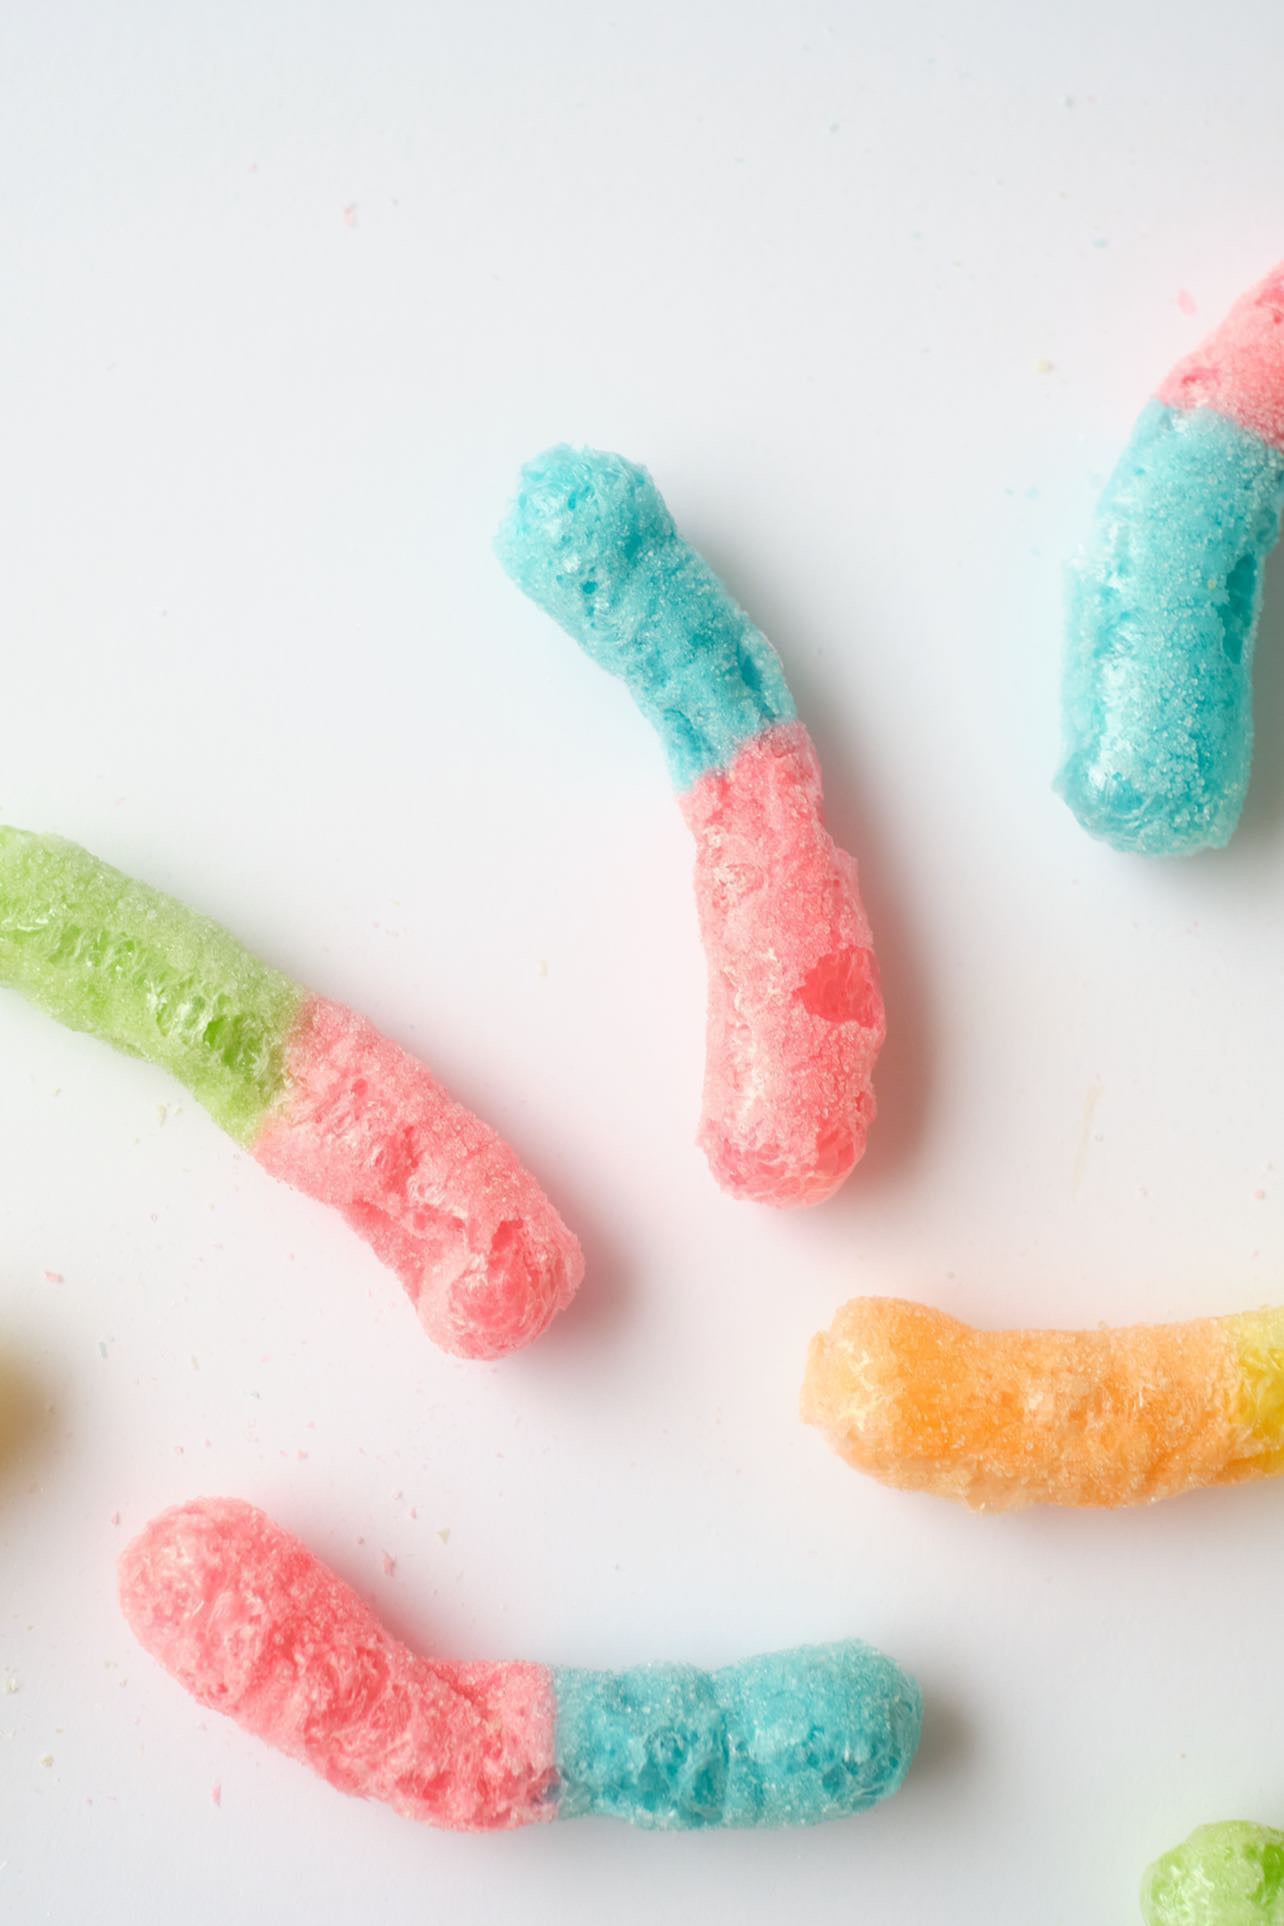 Sour worms freeze dried